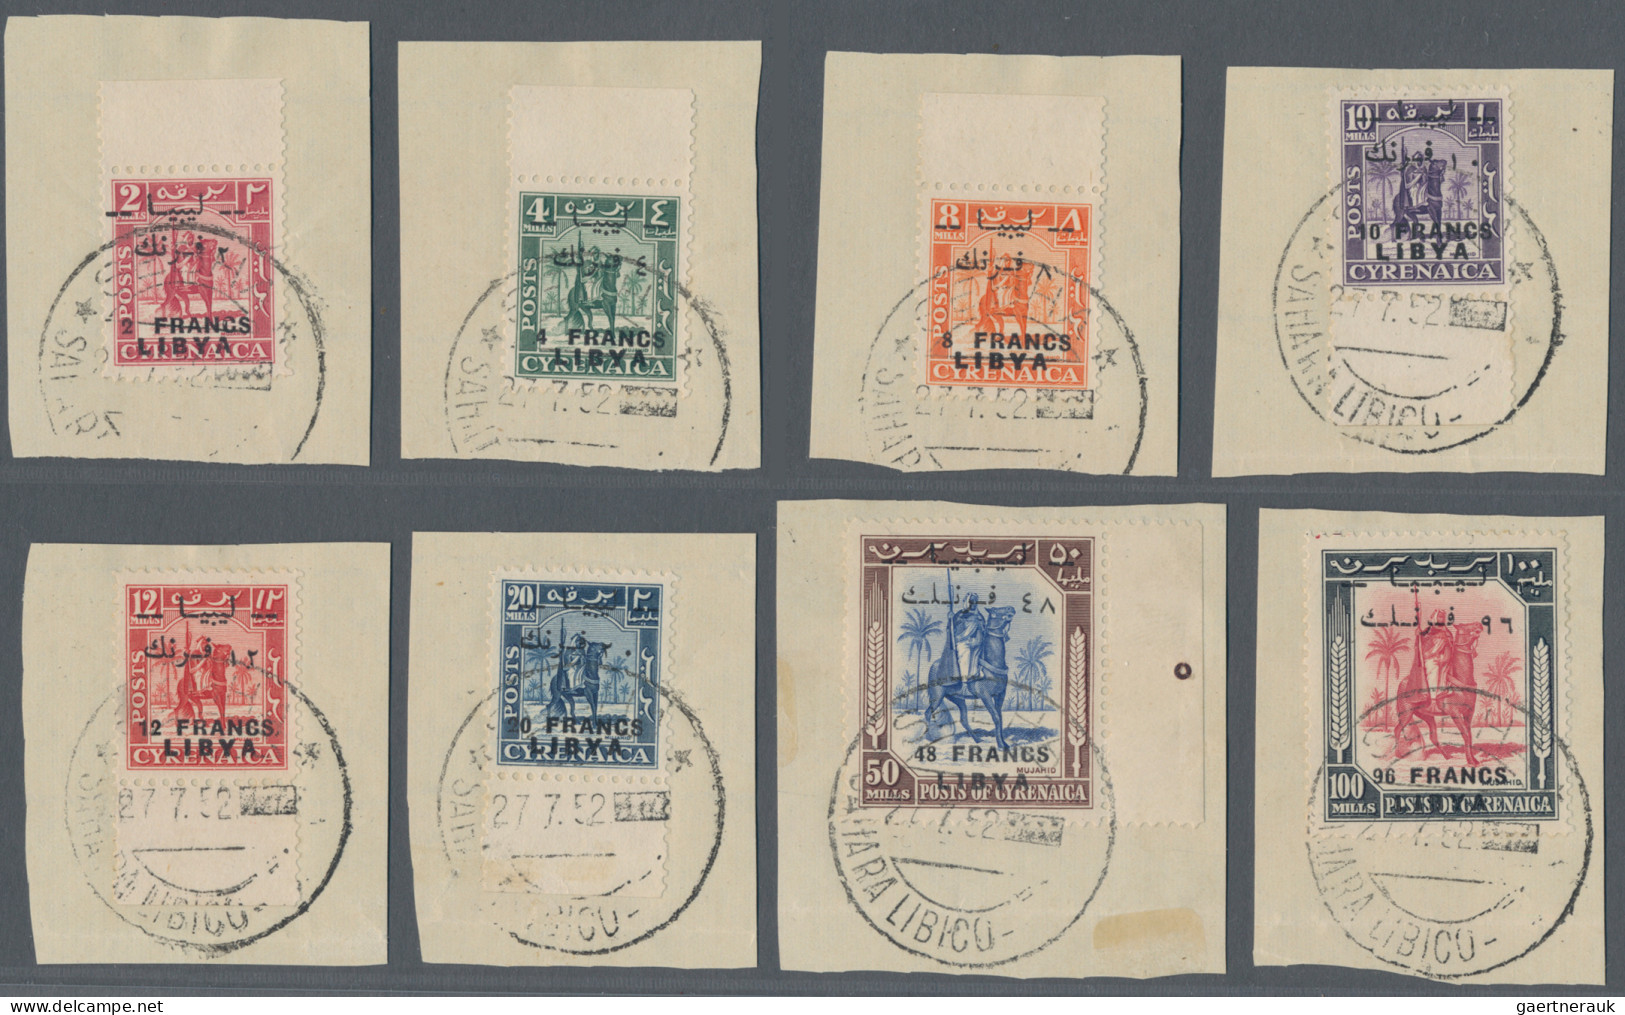 Libya: 1951, First Issue "Camel Trooper" Overprinted "LIBYA" And French Currency - Libia